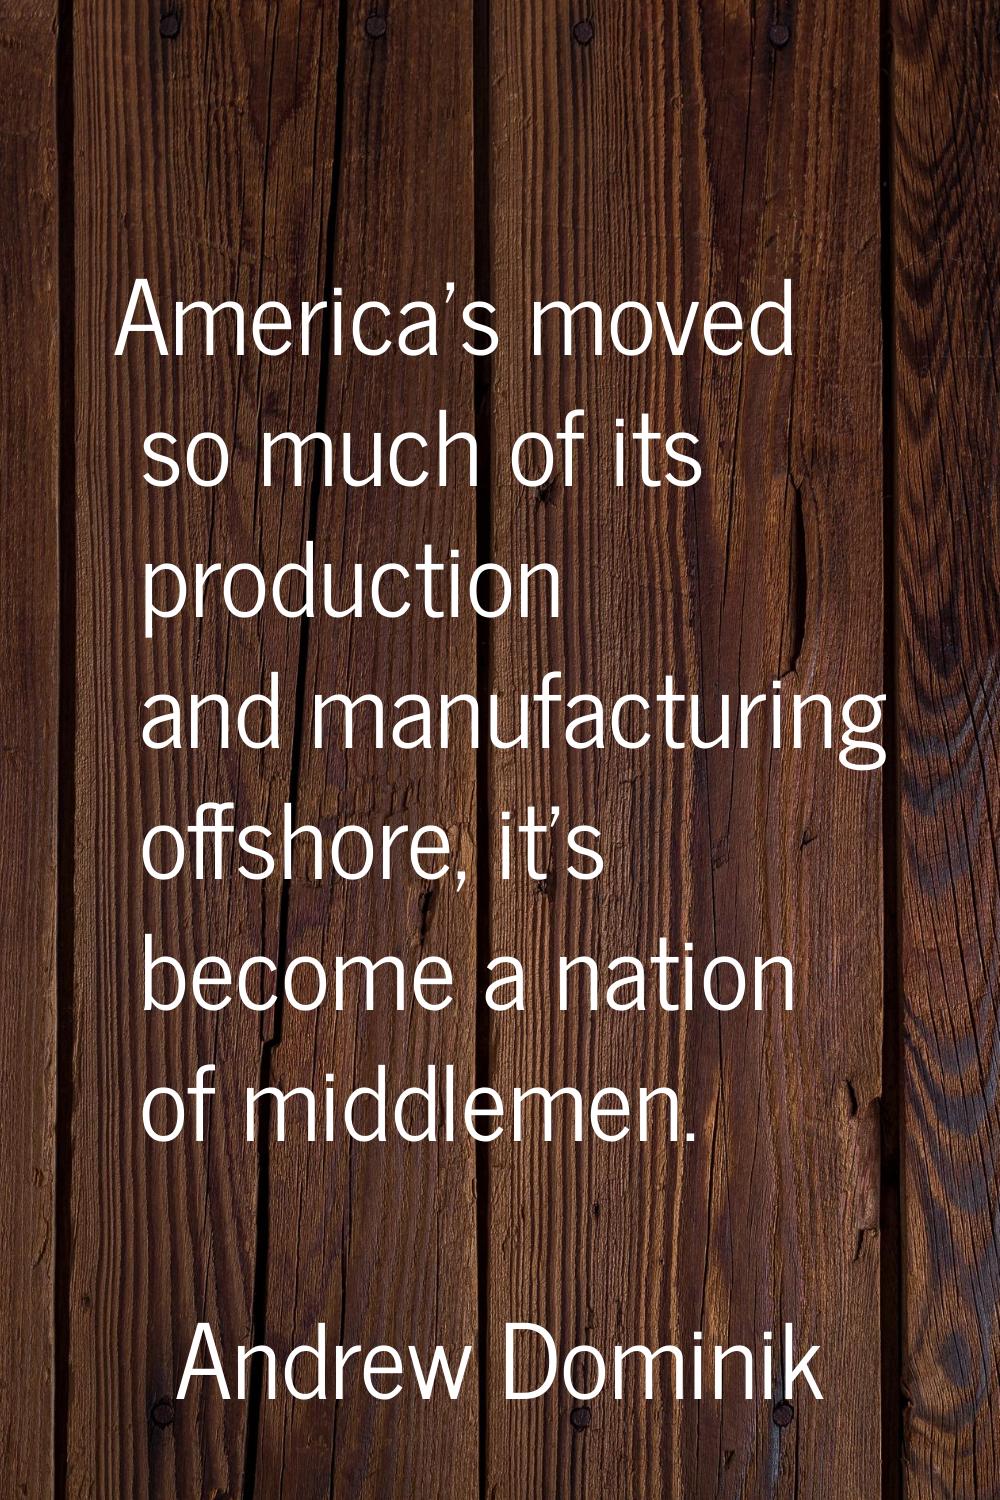 America's moved so much of its production and manufacturing offshore, it's become a nation of middl